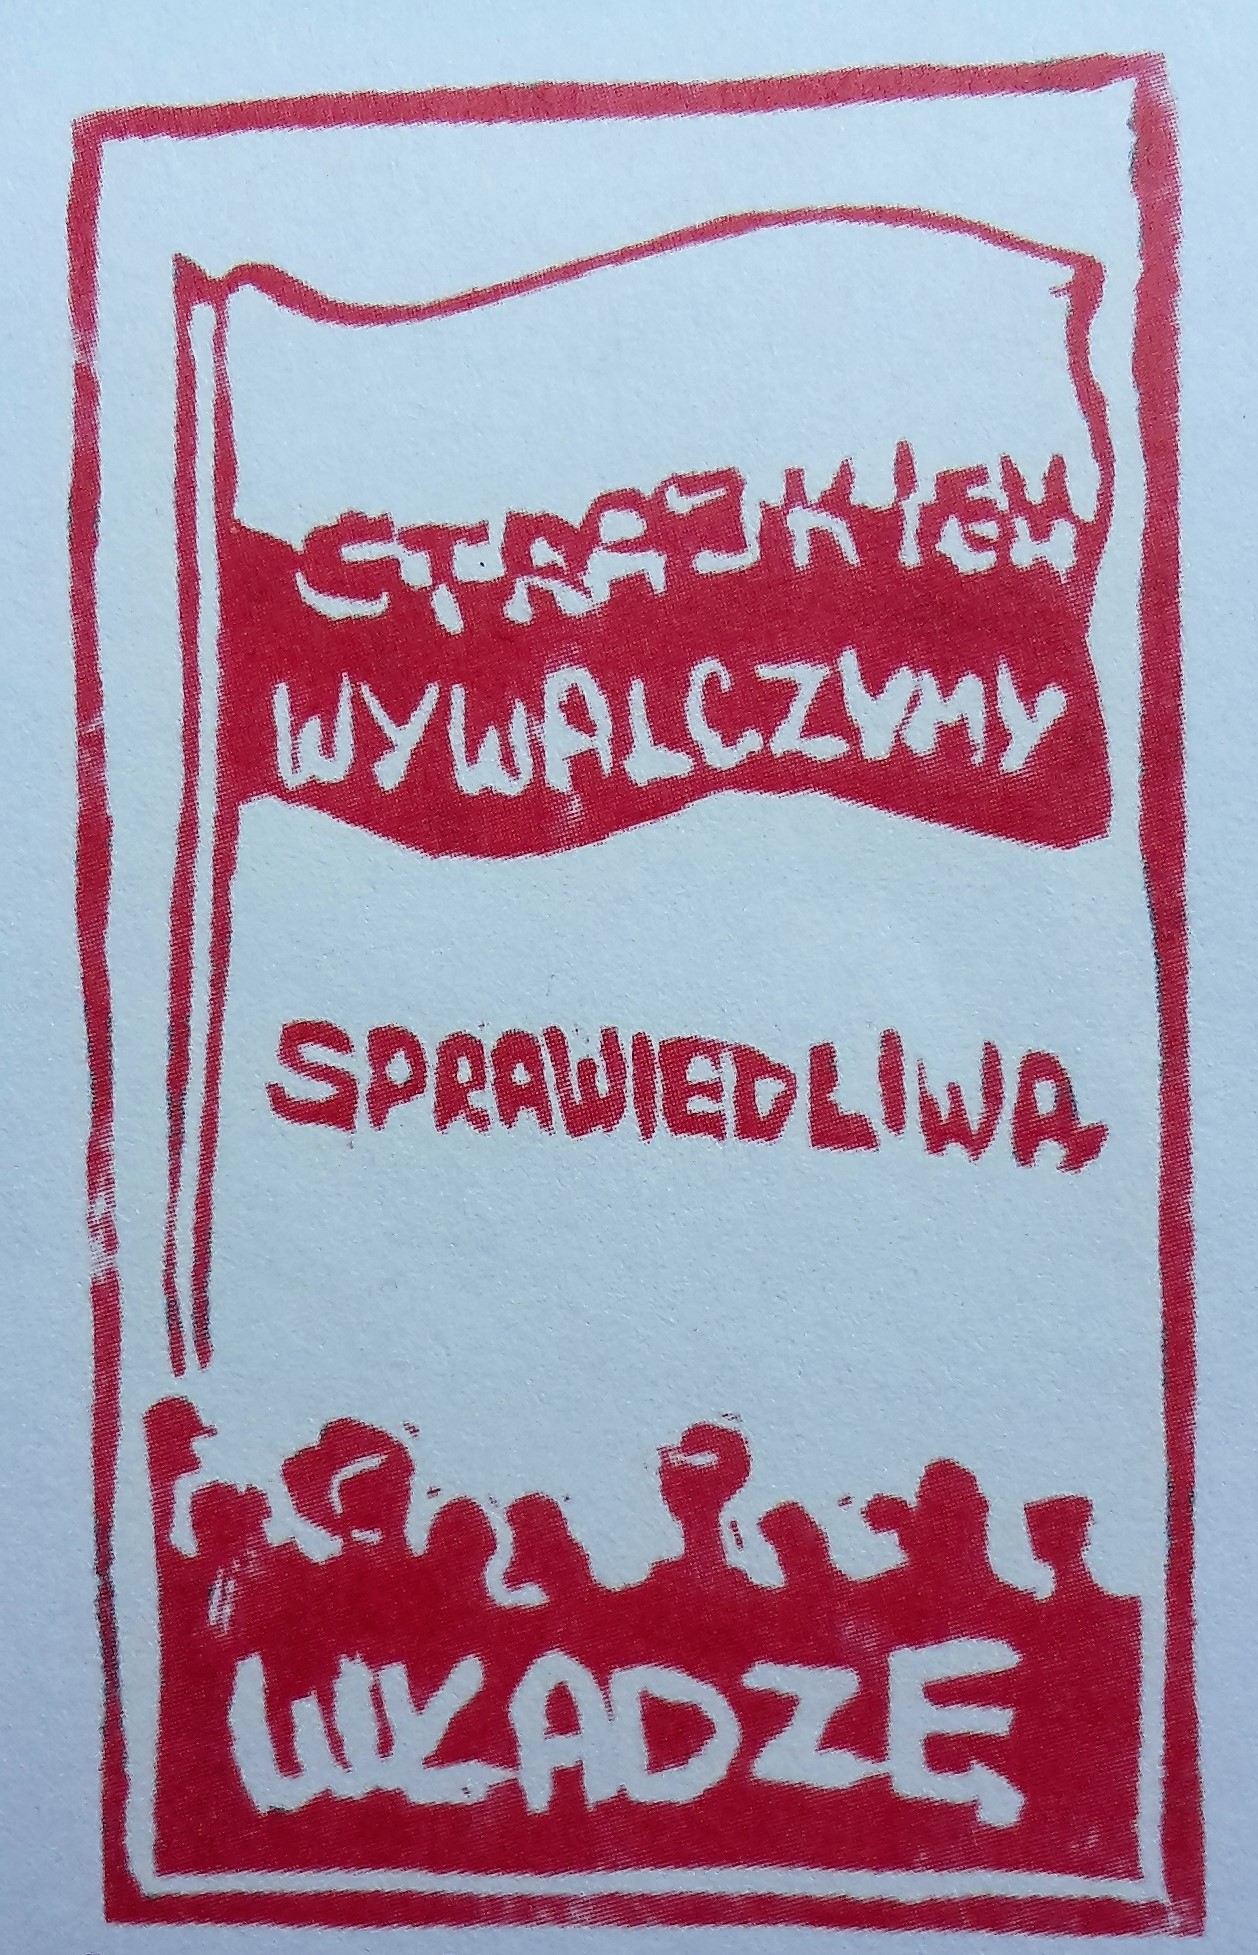 Photo comes from Michał Guć's article Stocznia Gdańska im. Lenina (unliblished material, shared by the author). 